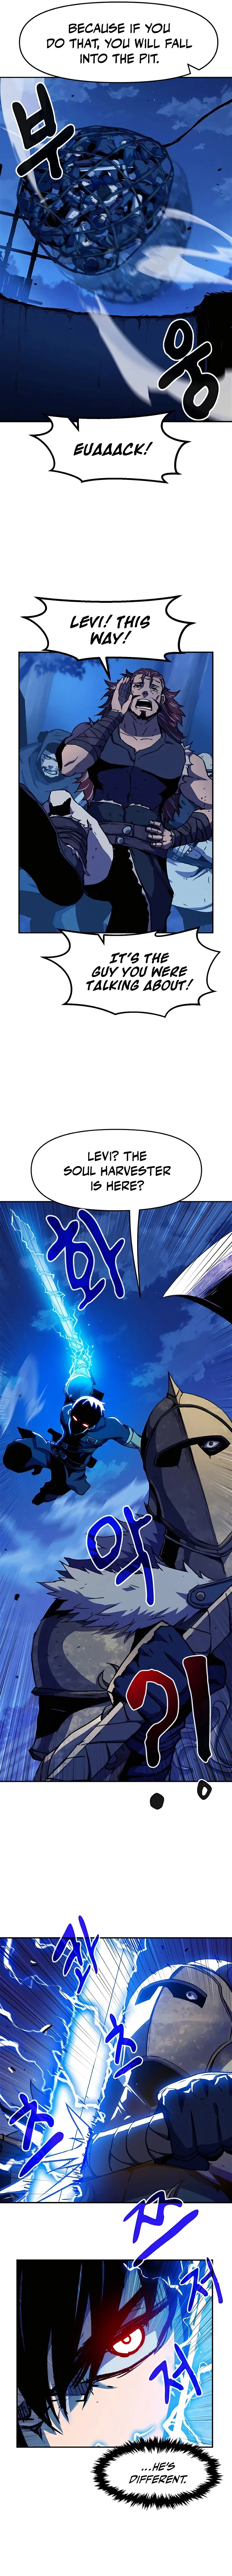 I BECAME A TERMINALLY-ILL KNIGHT Chapter 5 page 13